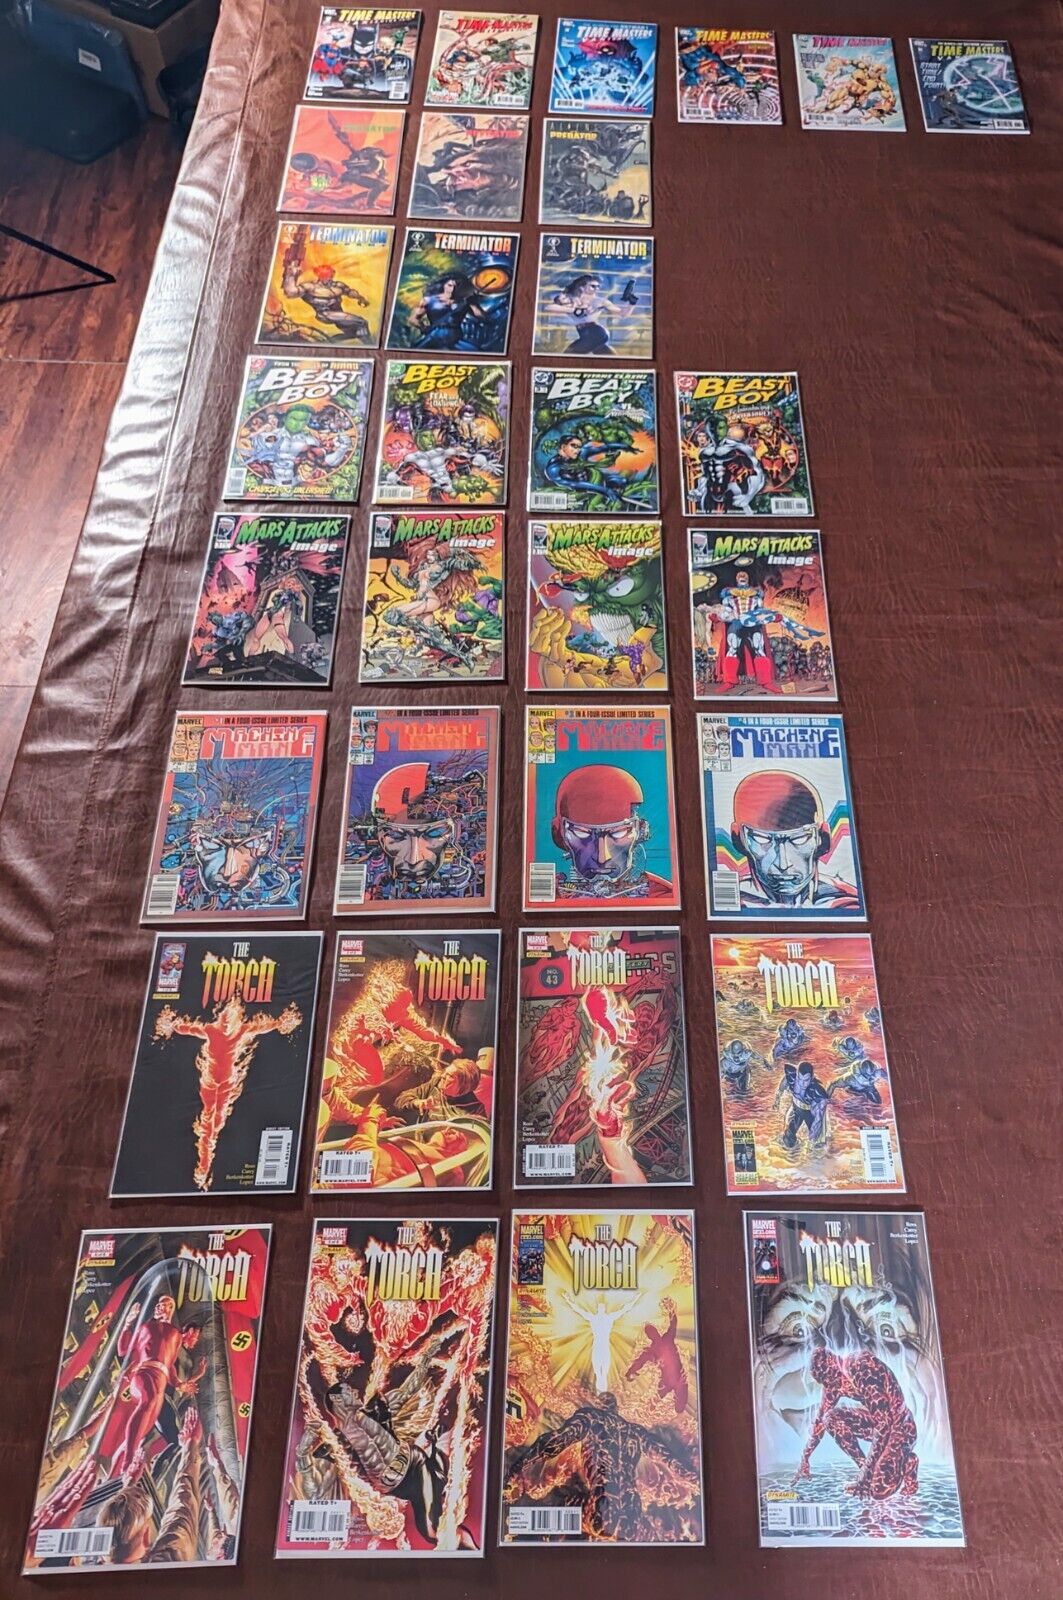  Marvel Image DC Comic Lot Of Complete Limited Series Releases 32 Total VF-NM